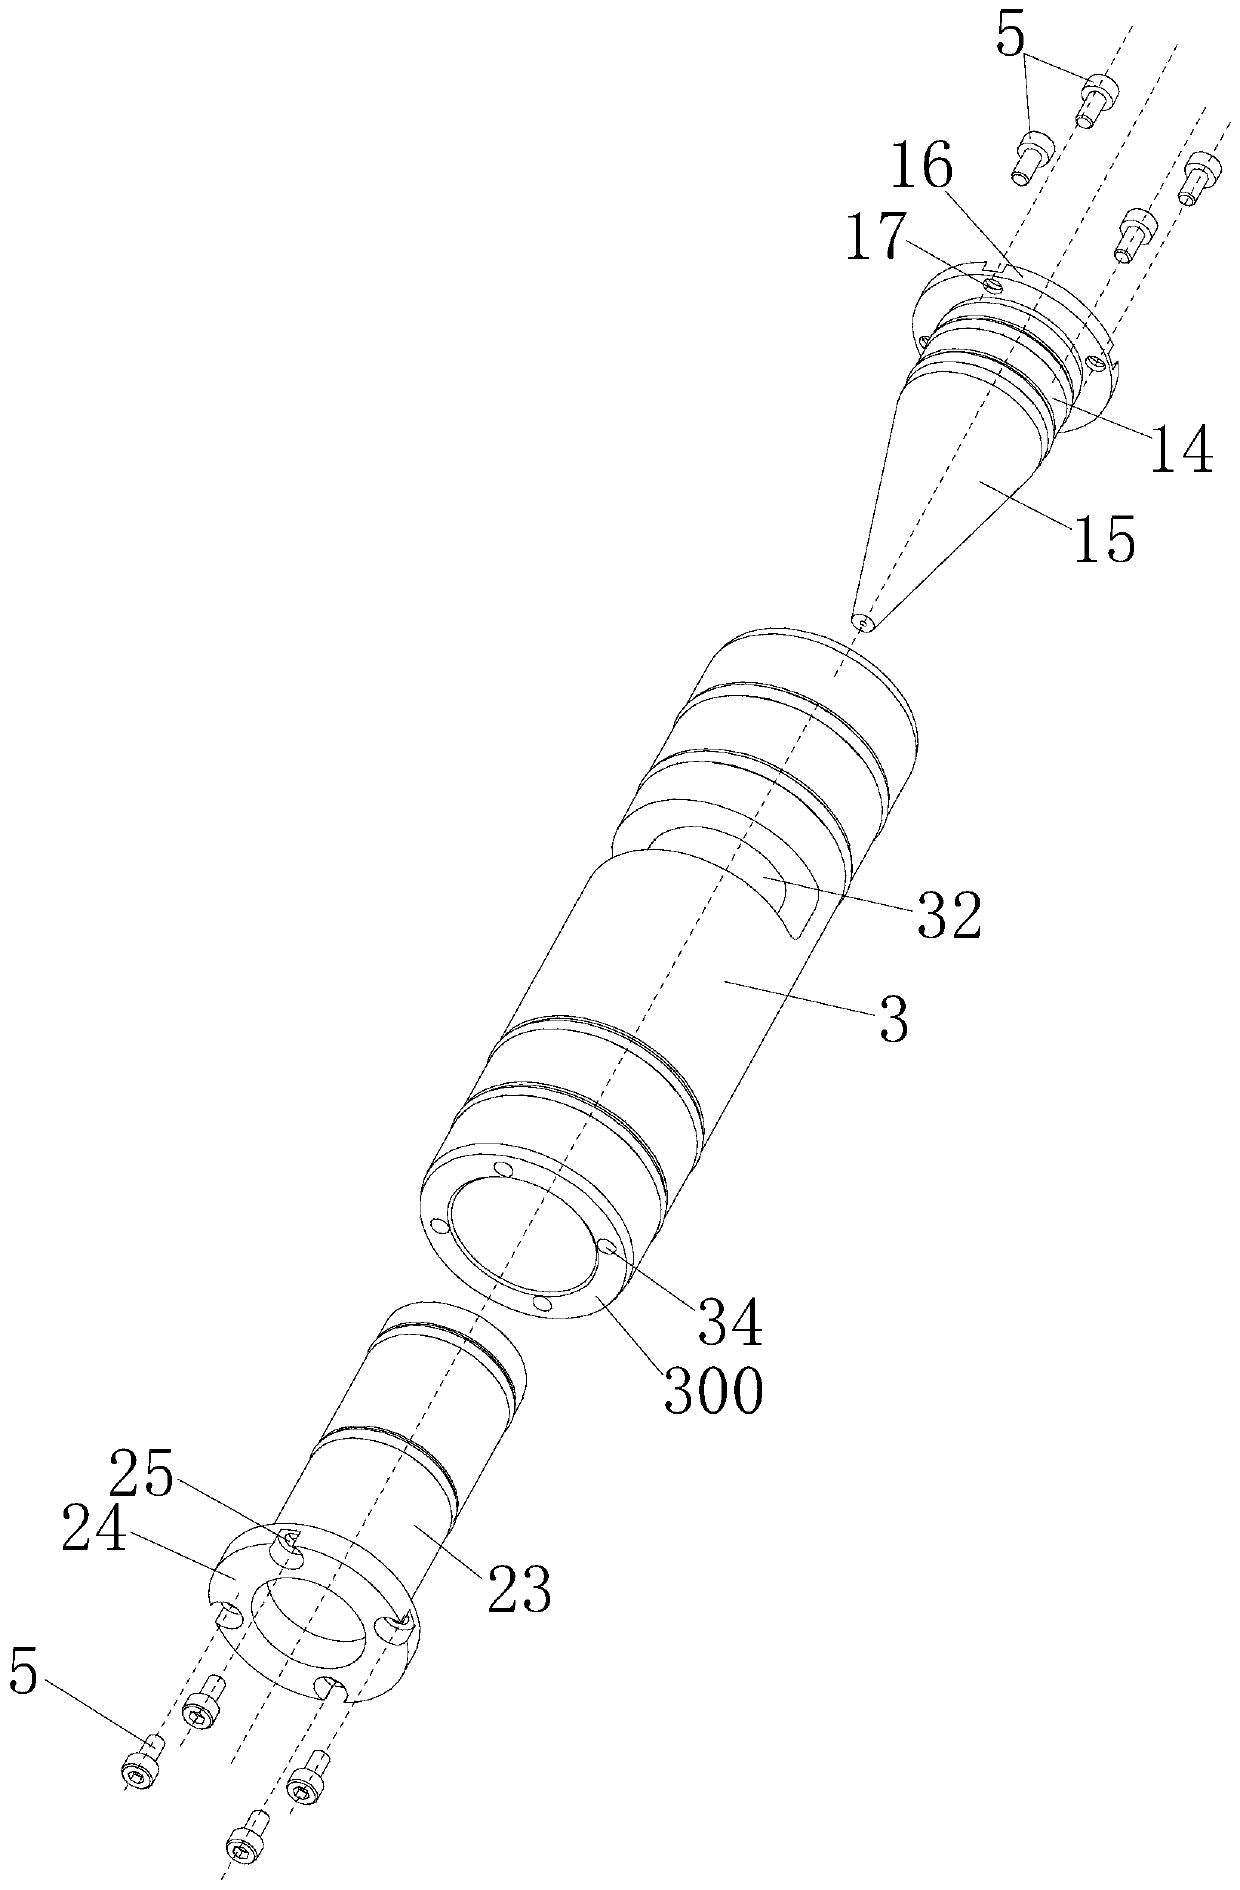 Ejector and fuel cell hydrogen inlet adjusting and hydrogen-returning device applying same